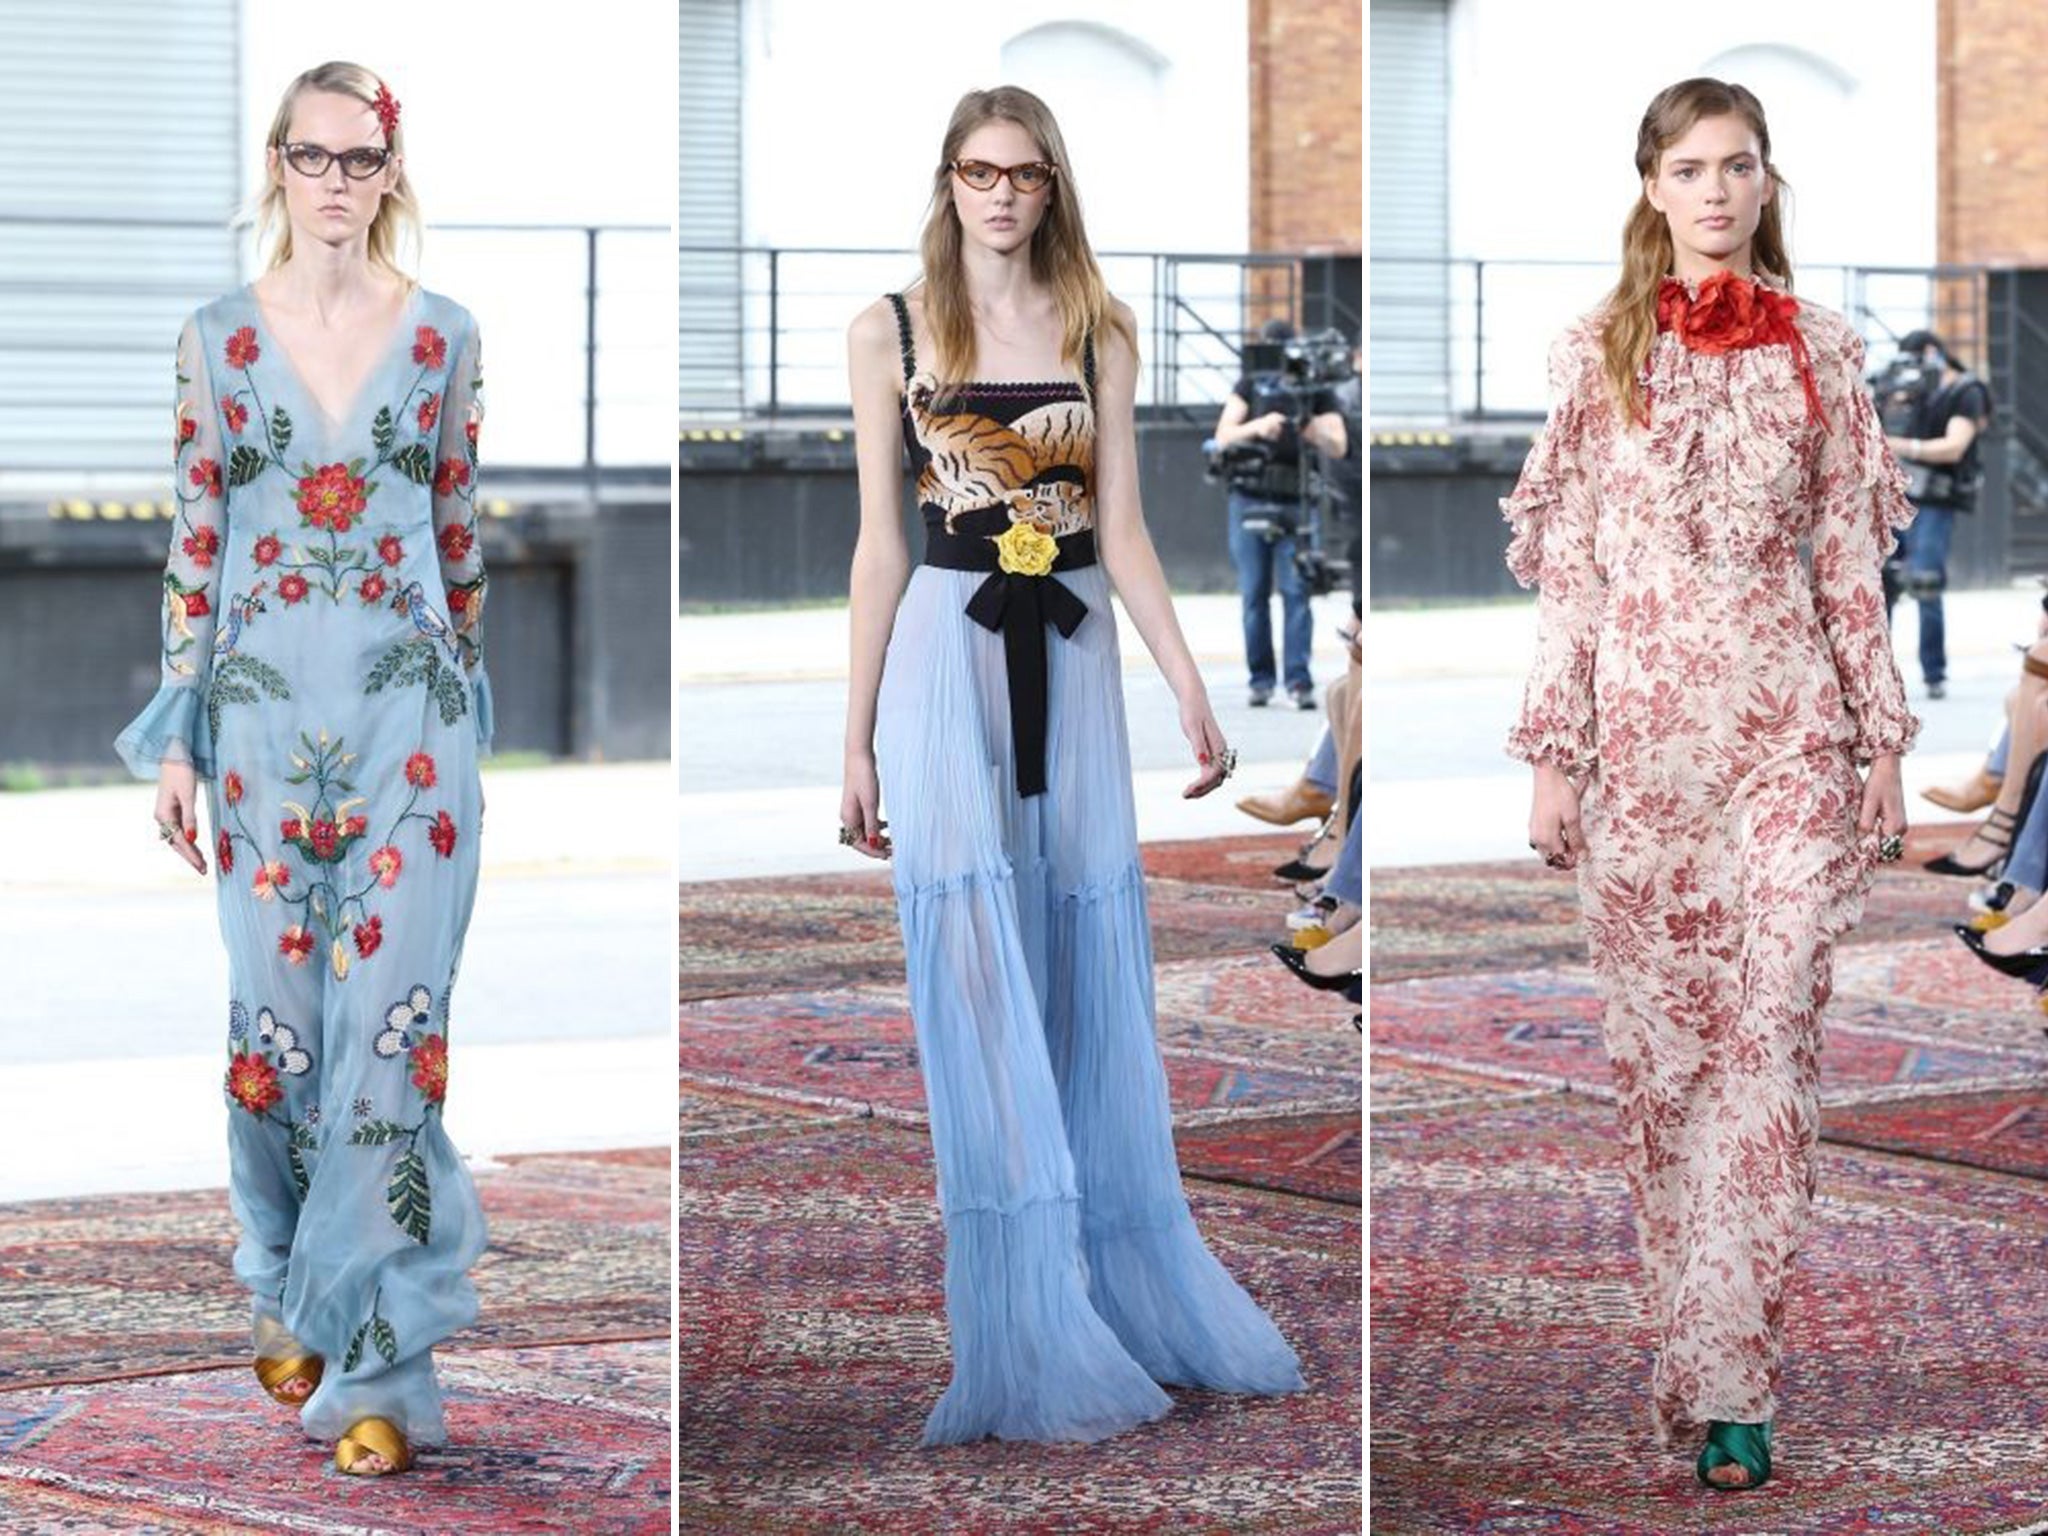 Death and glitter: Gucci hosts France show in Roman ruins